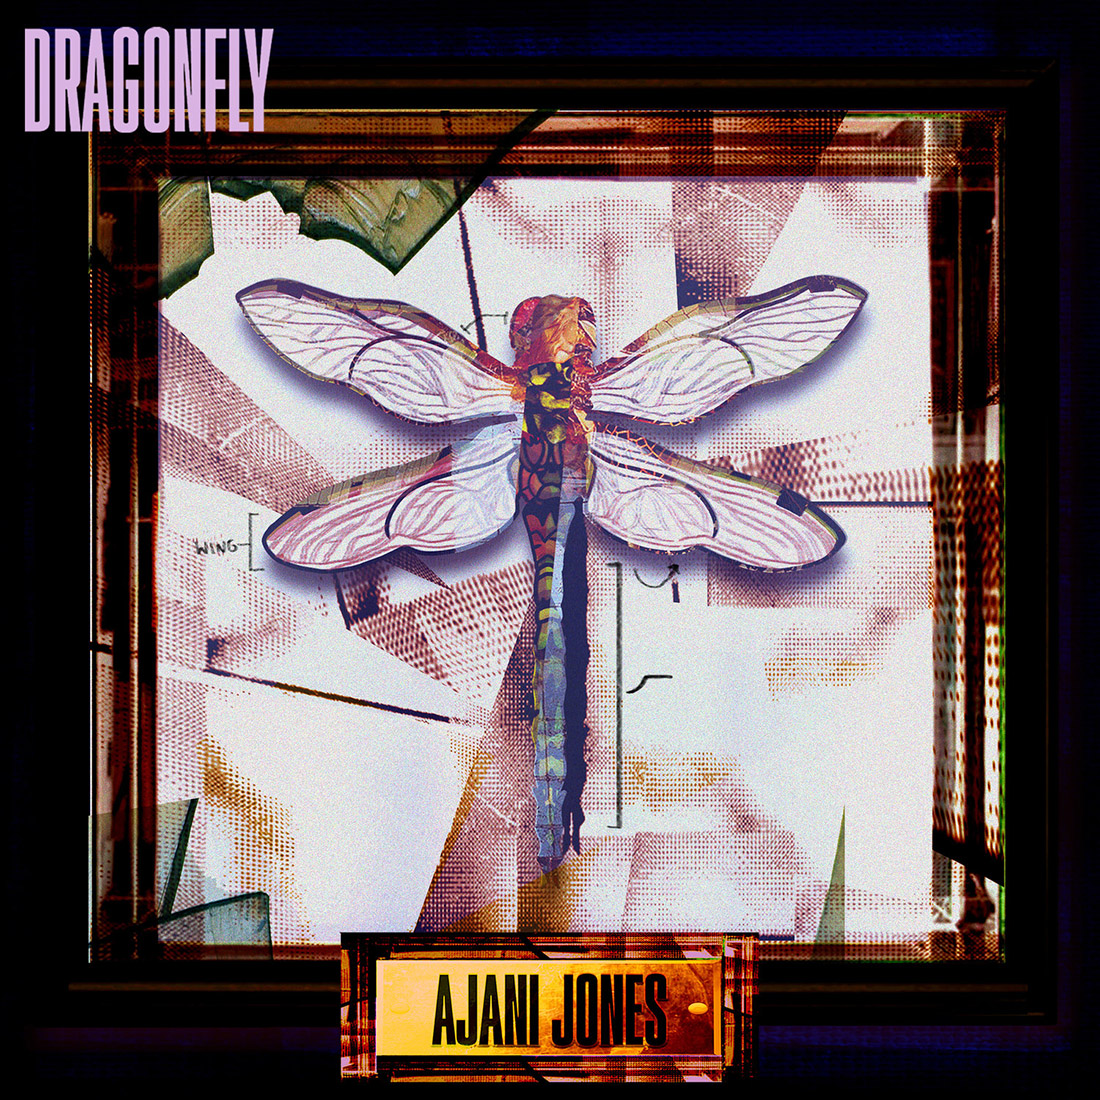 Ajani Jones soars high with debut LP "Dragonfly" .